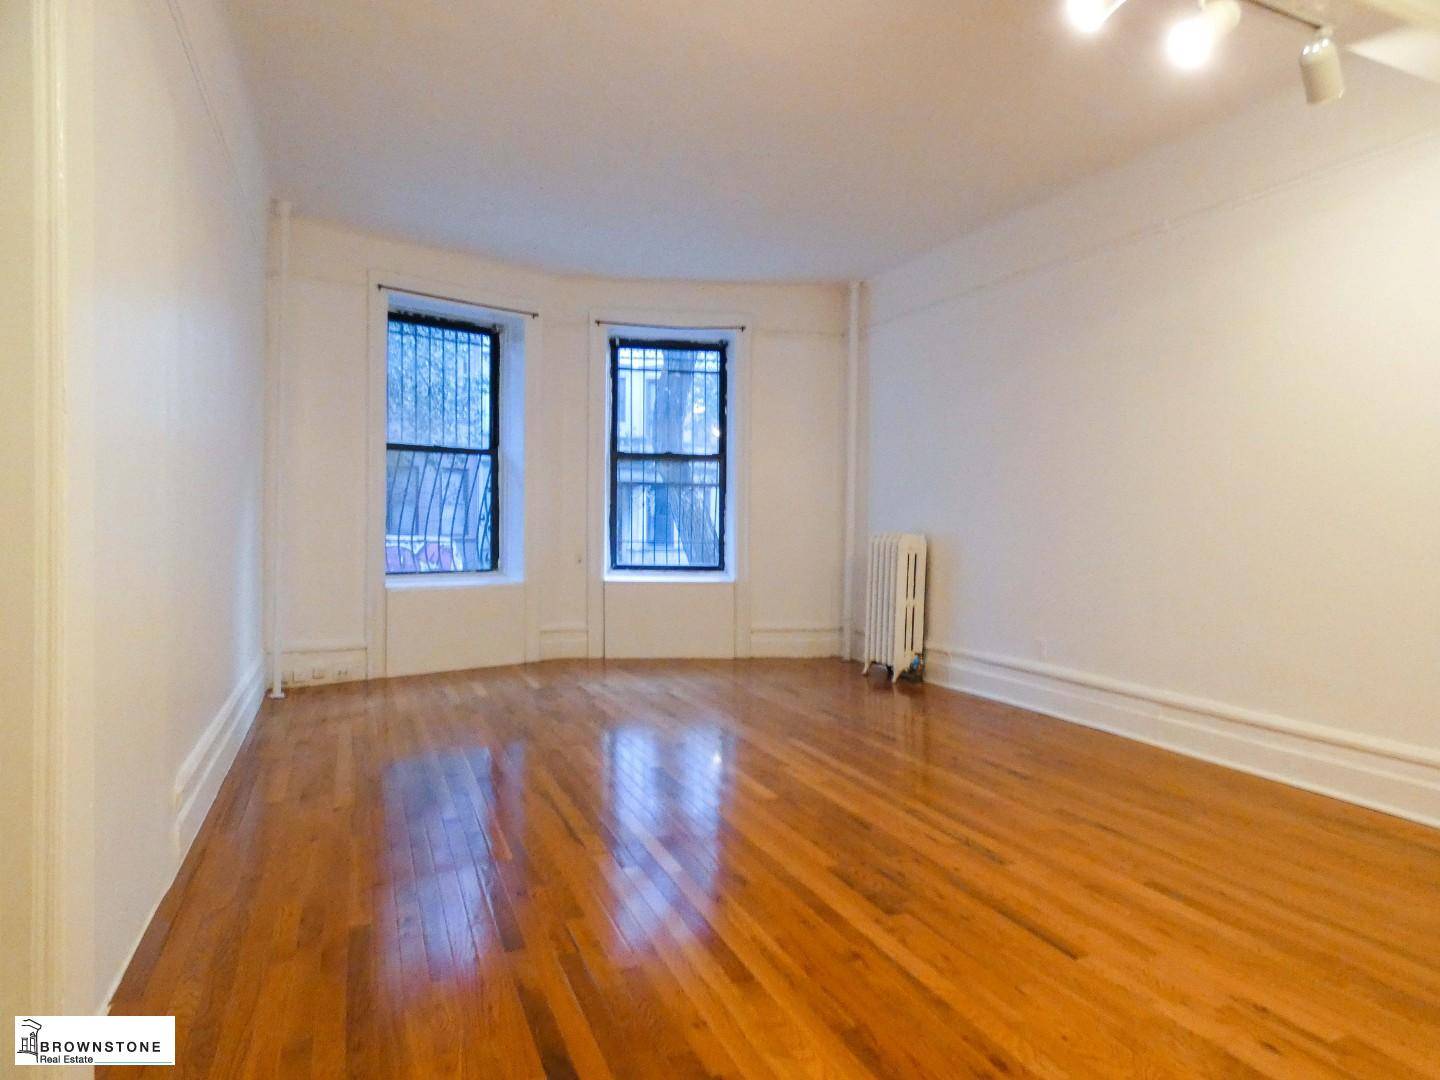 This elegant large two bedroom apartment is located on a quiet street in Park Slope.